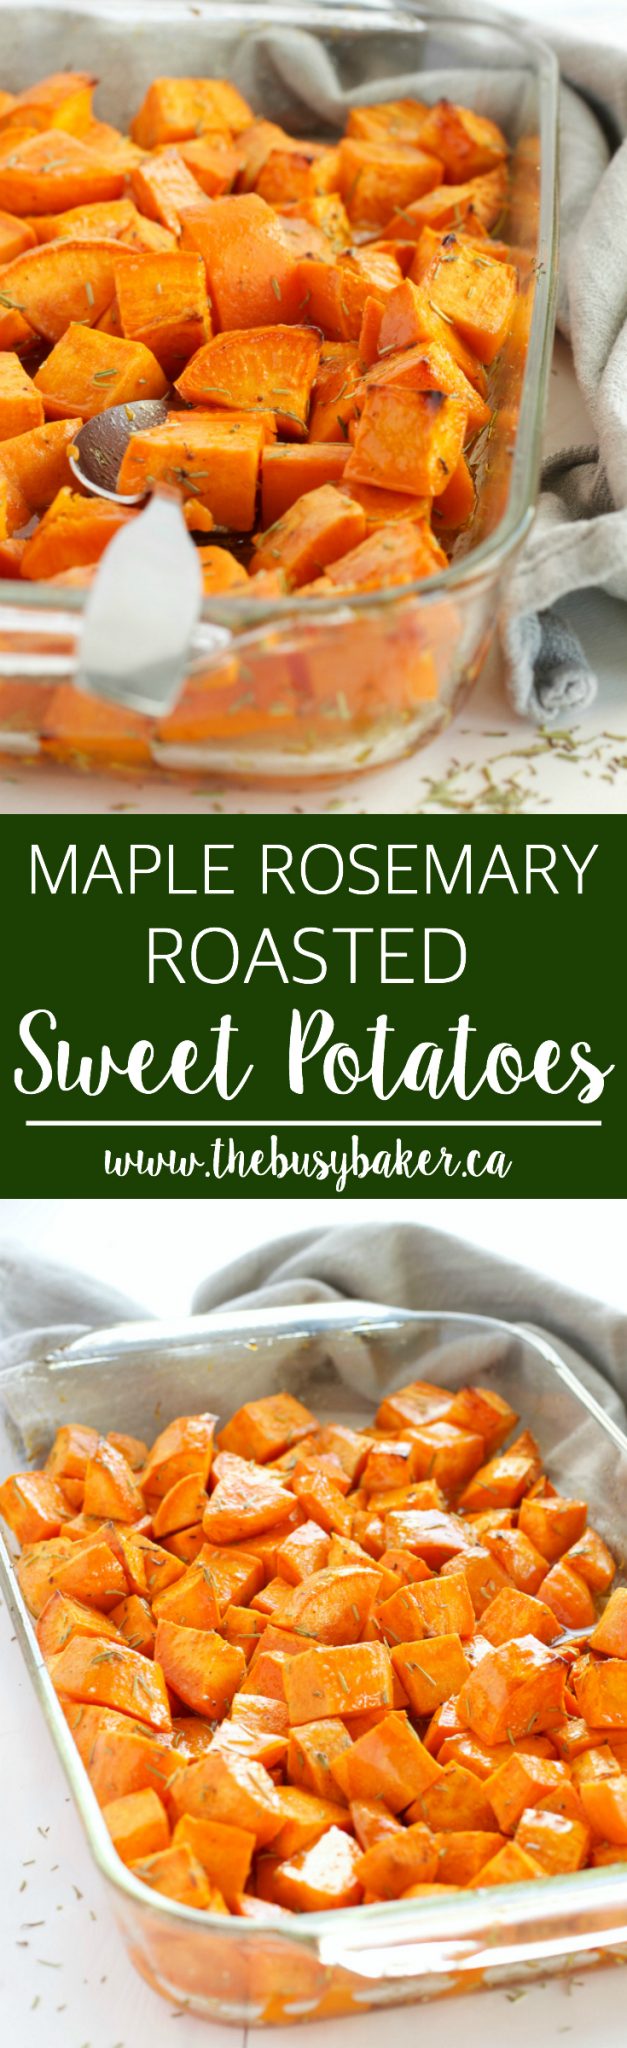 These Maple Rosemary Roasted Sweet Potatoes are filling and sweet with the perfect glaze from real maple syrup and they taste just like the holidays! Recipe from thebusybaker.ca! via @busybakerblog